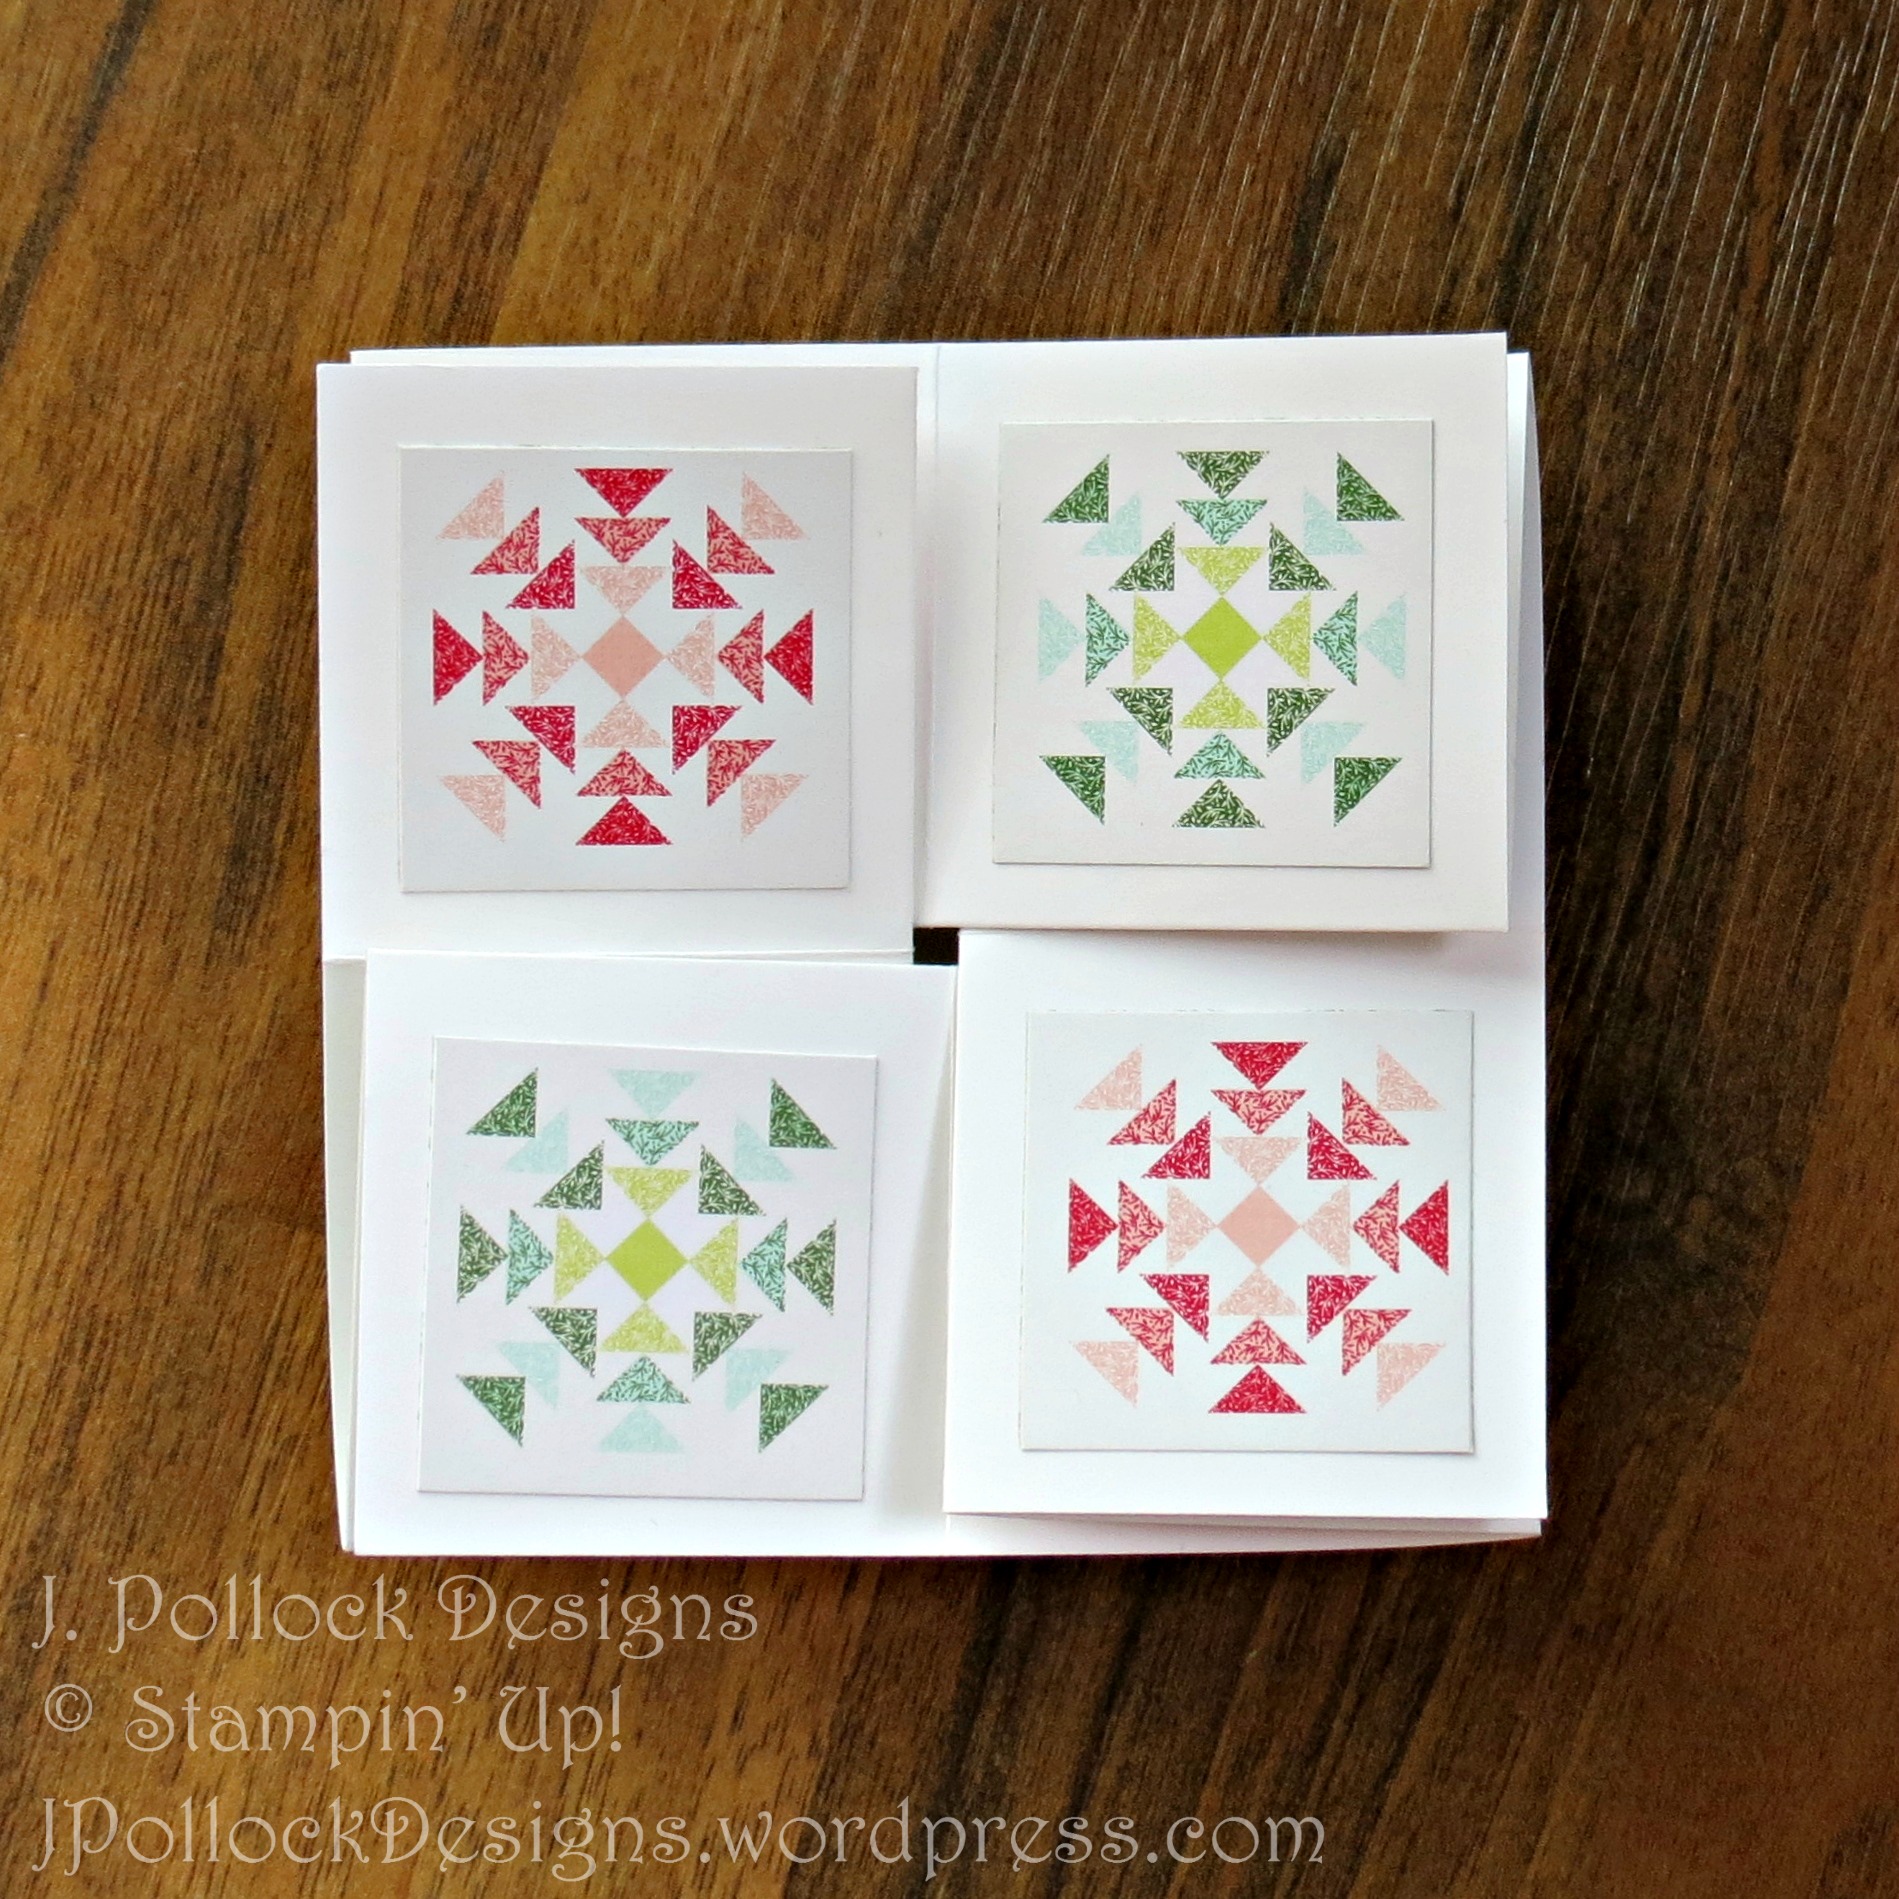 J. Pollock Designs - Stampin' Up! - Quilted Christmas